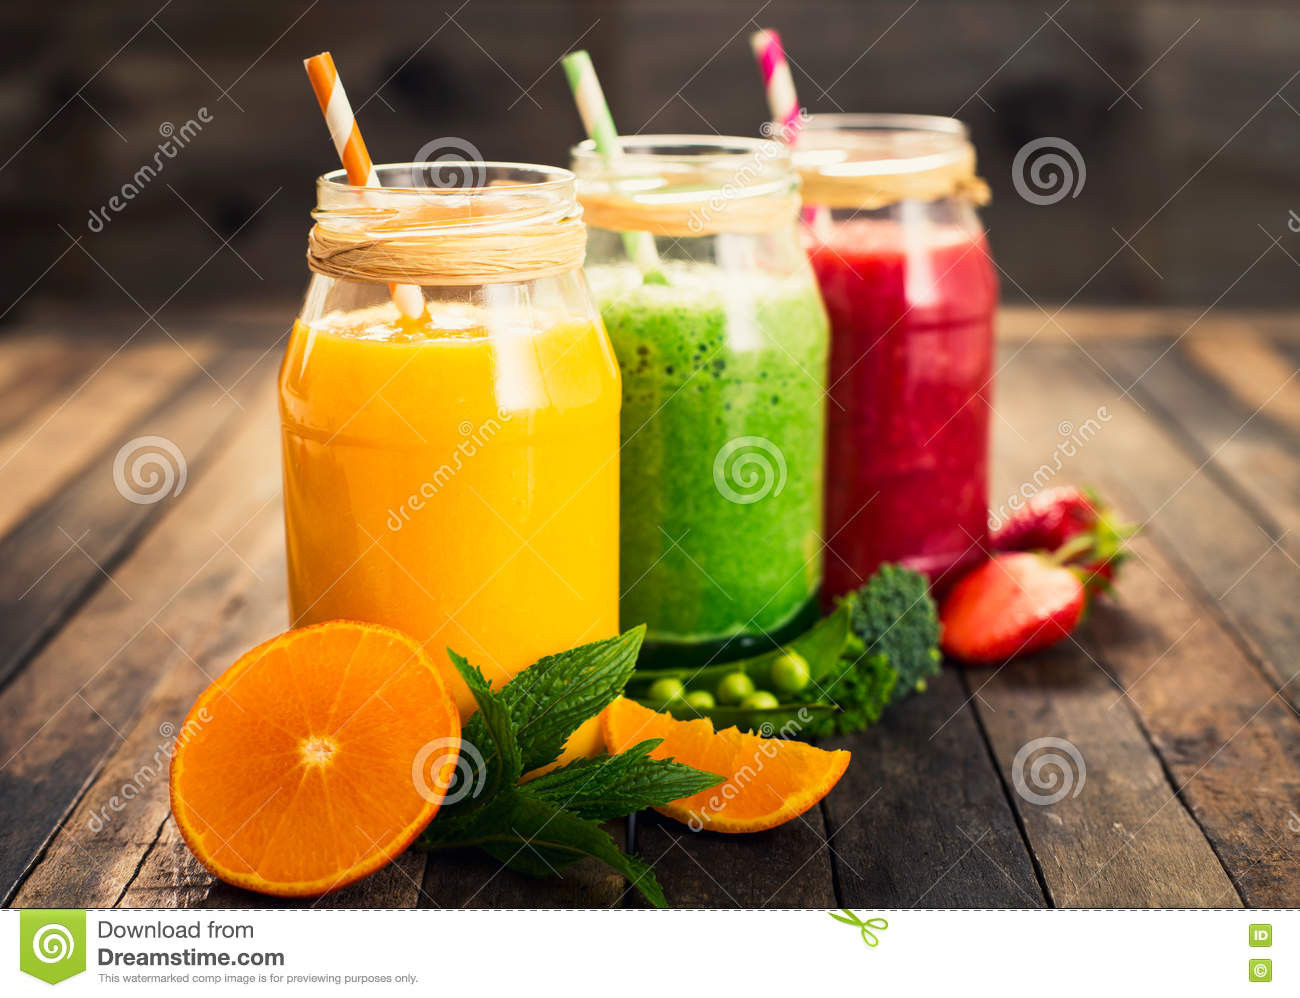 Healthy Fruit and Veggie Smoothies 20 Of the Best Ideas for Healthy Fruit and Ve Able Smoothies Stock Image Image